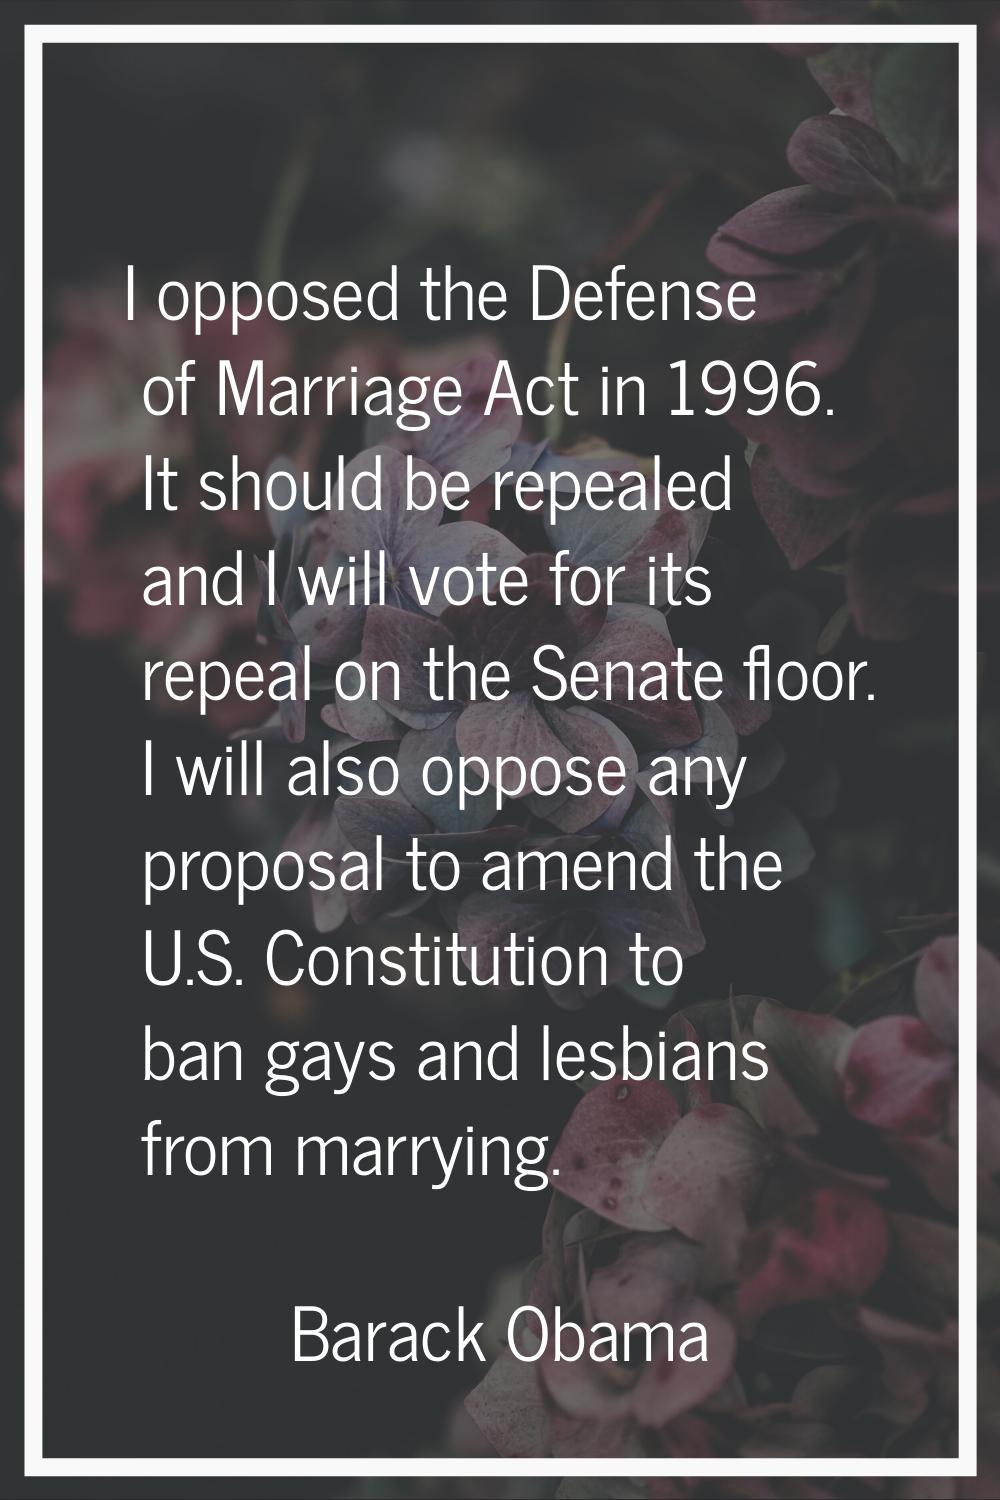 I opposed the Defense of Marriage Act in 1996. It should be repealed and I will vote for its repeal